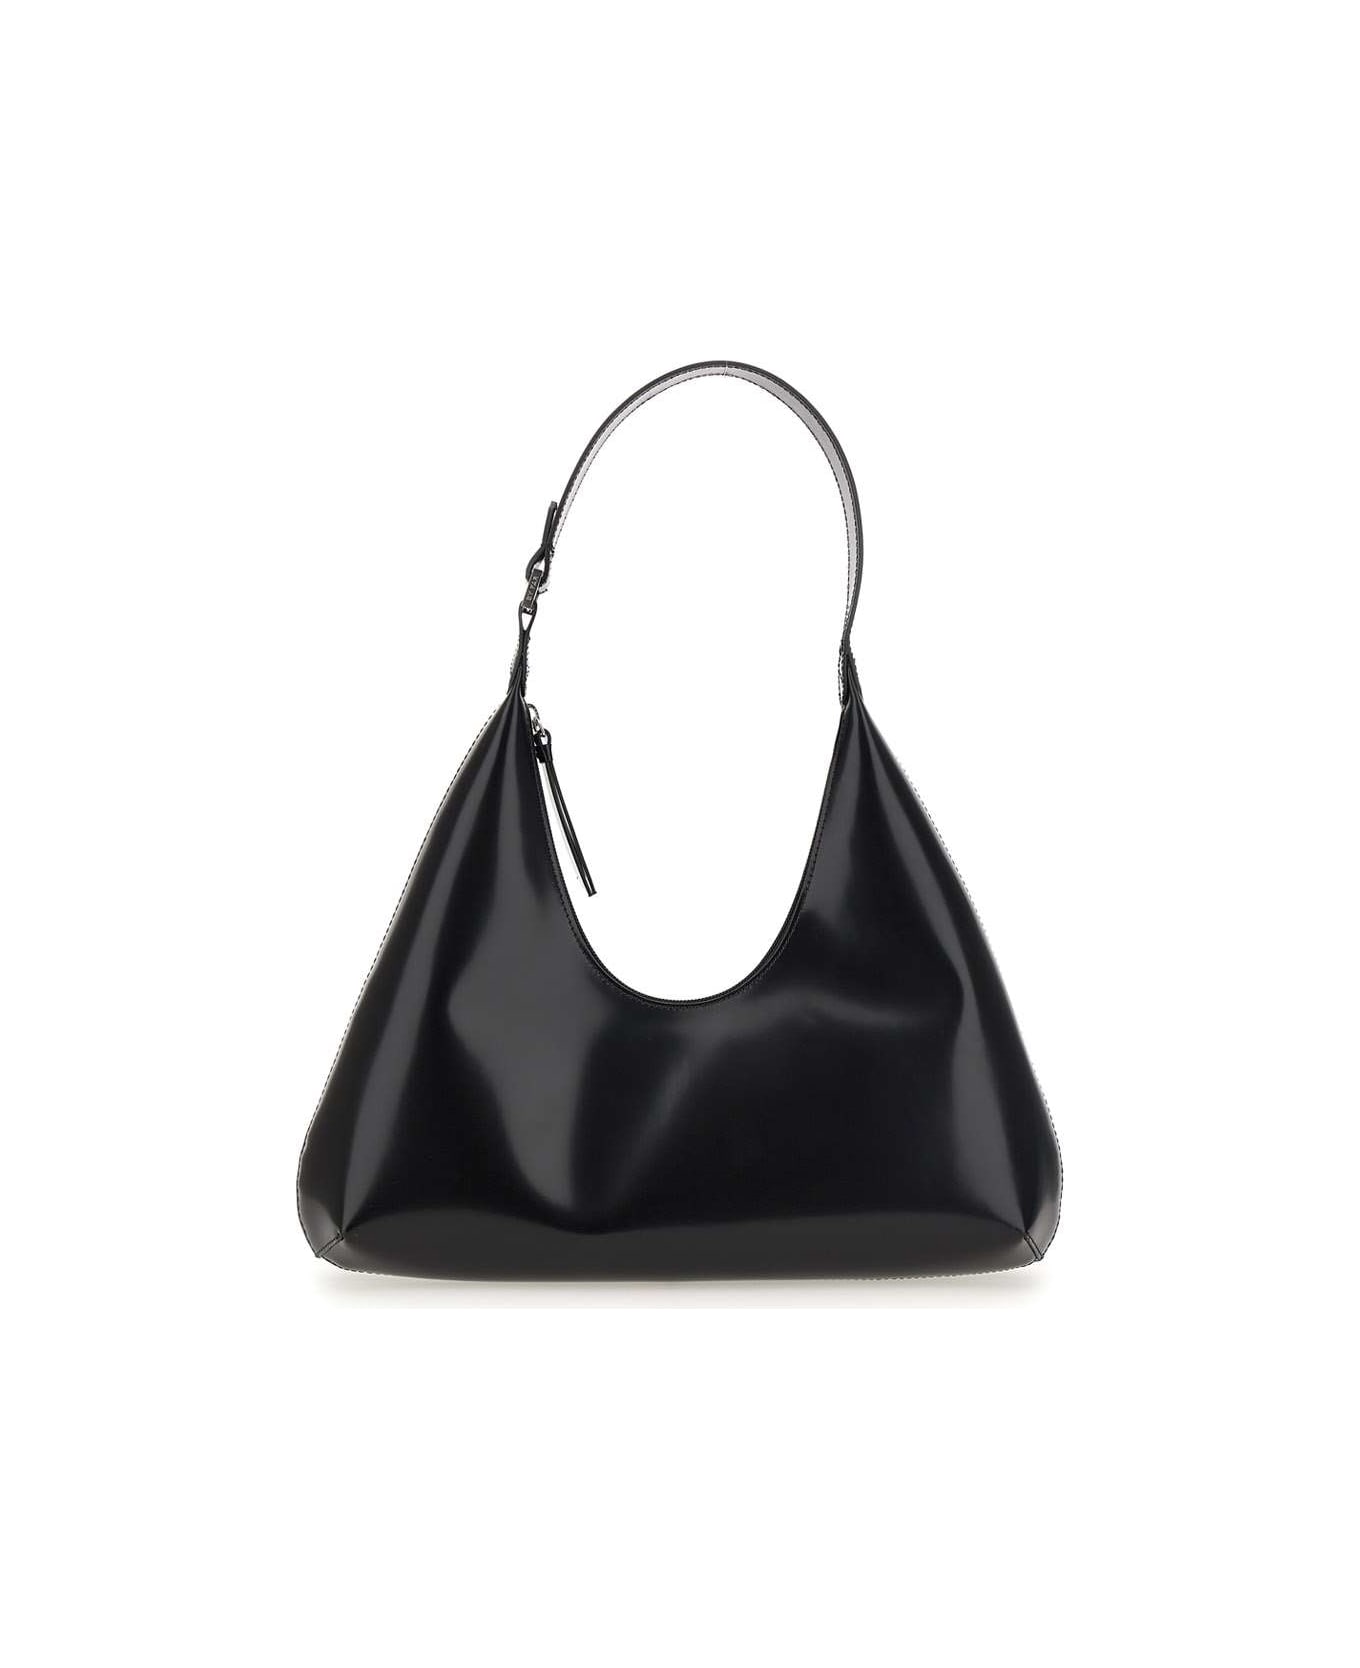 BY FAR 'amber' Leather Bag - Black トートバッグ